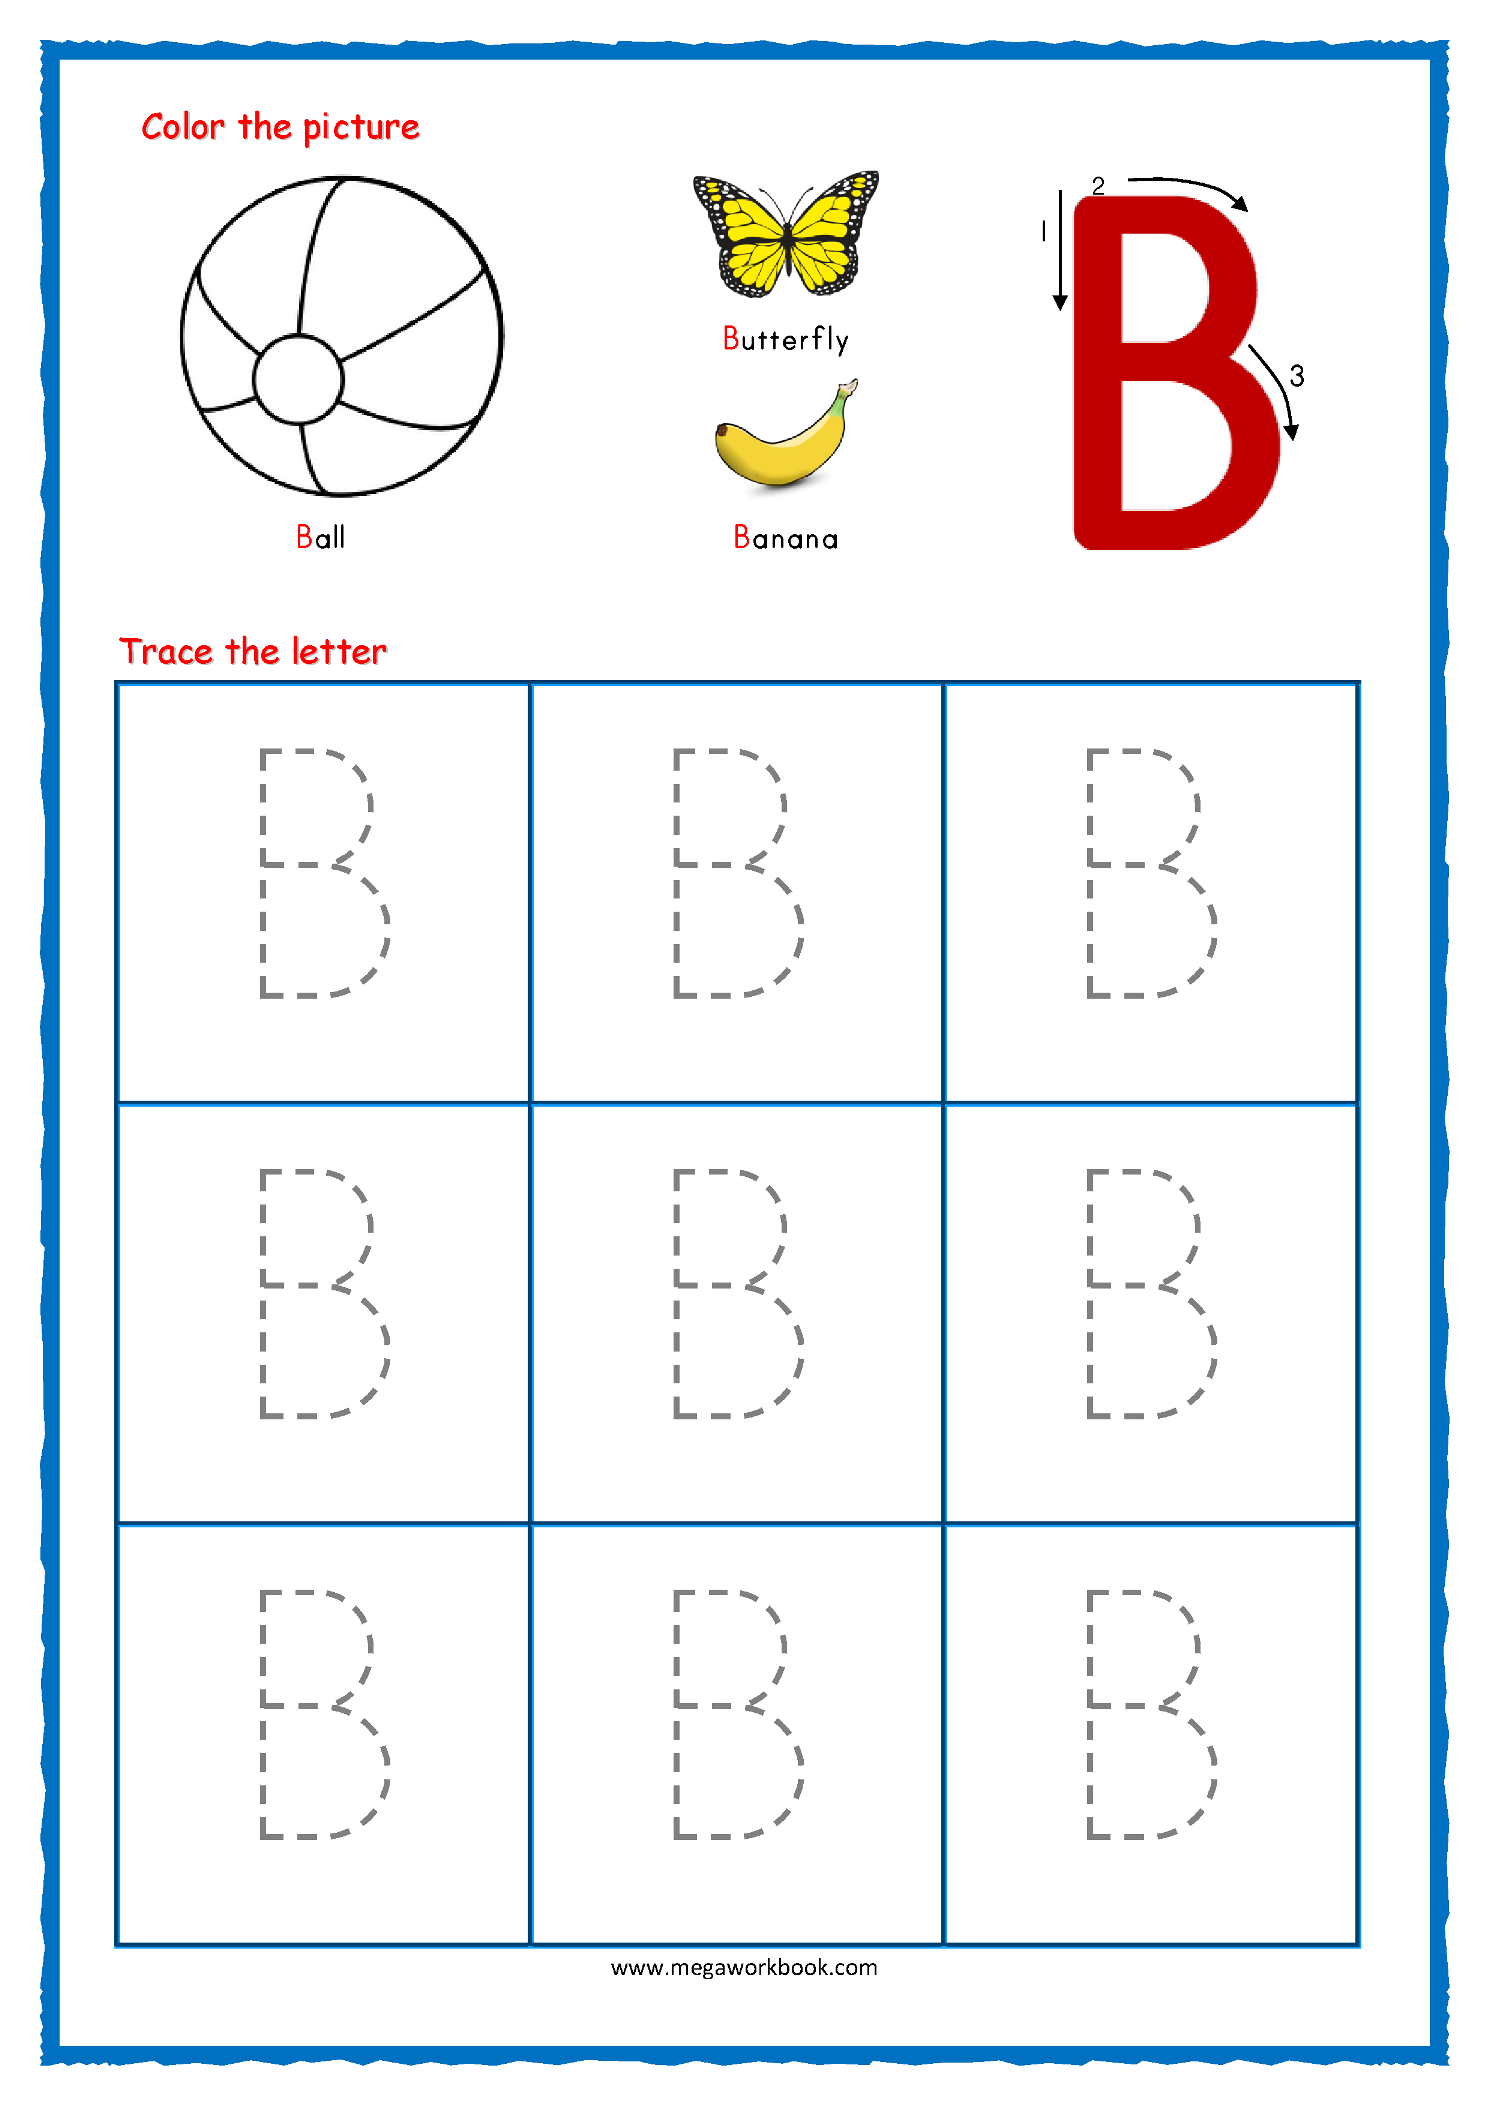 Worksheet ~ Capital Letter Tracing With Crayons 02 Alphabet within Letter I Tracing Preschool